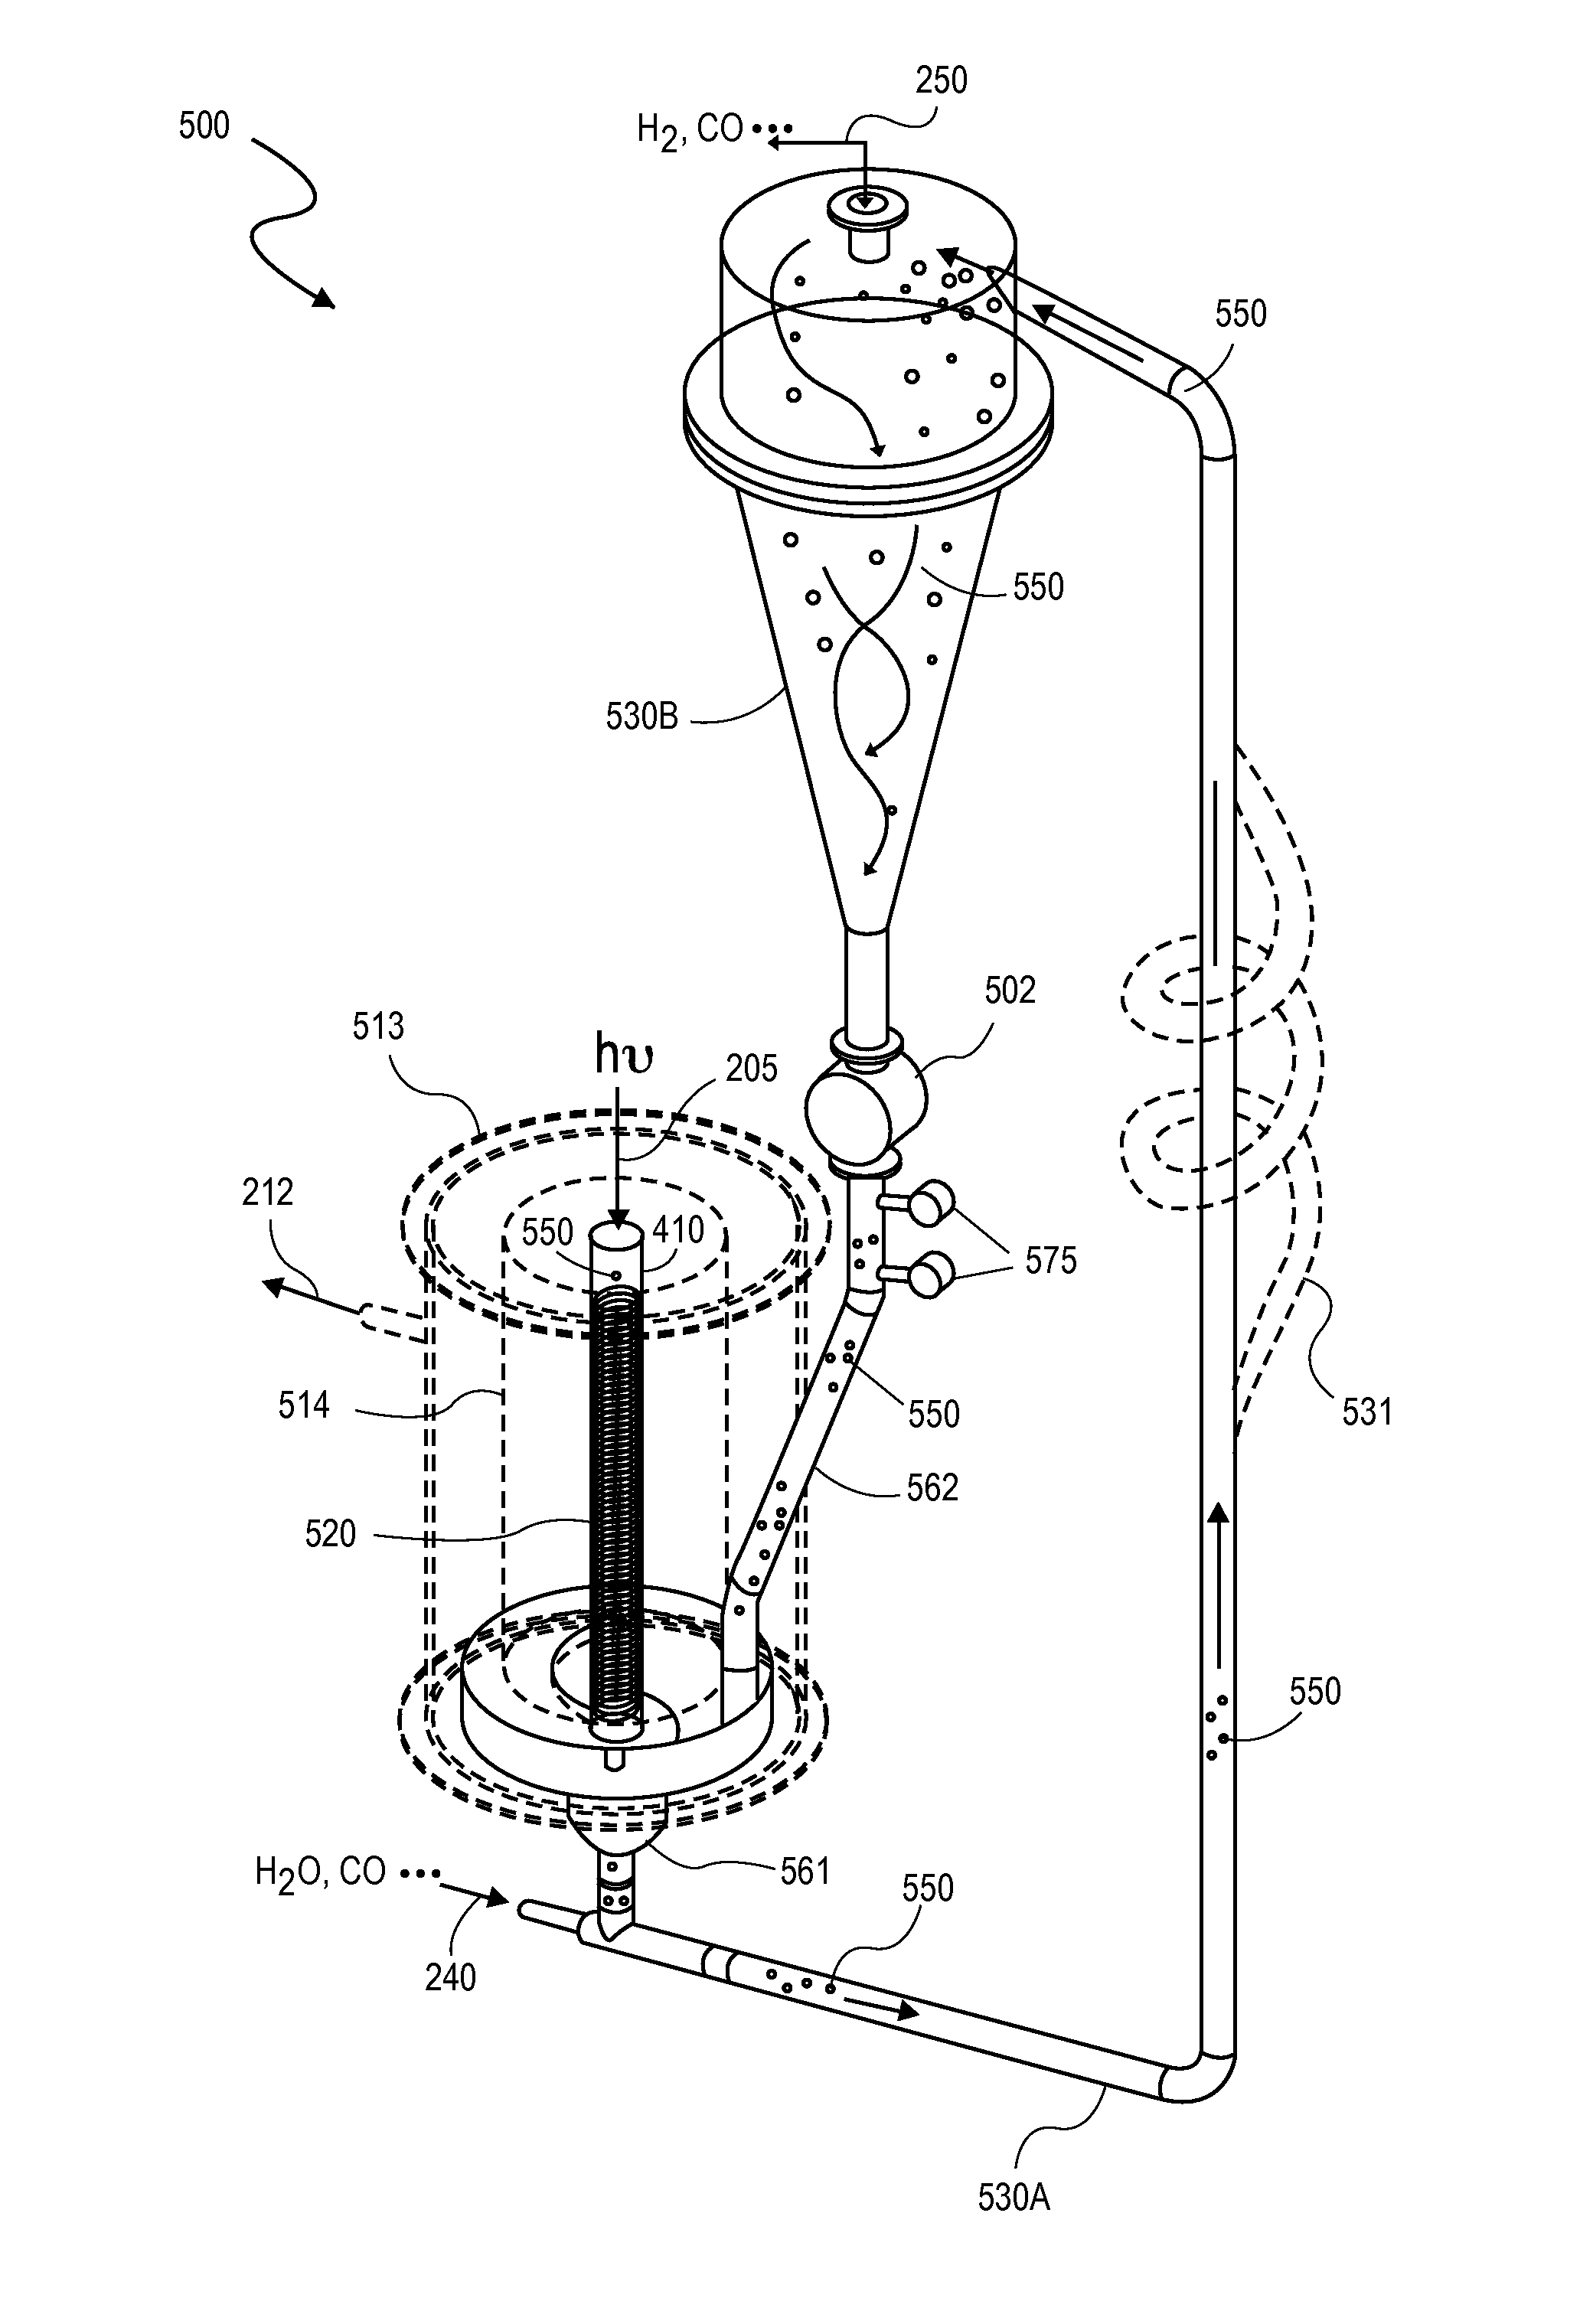 Moving bed reactor for solar thermochemical fuel production